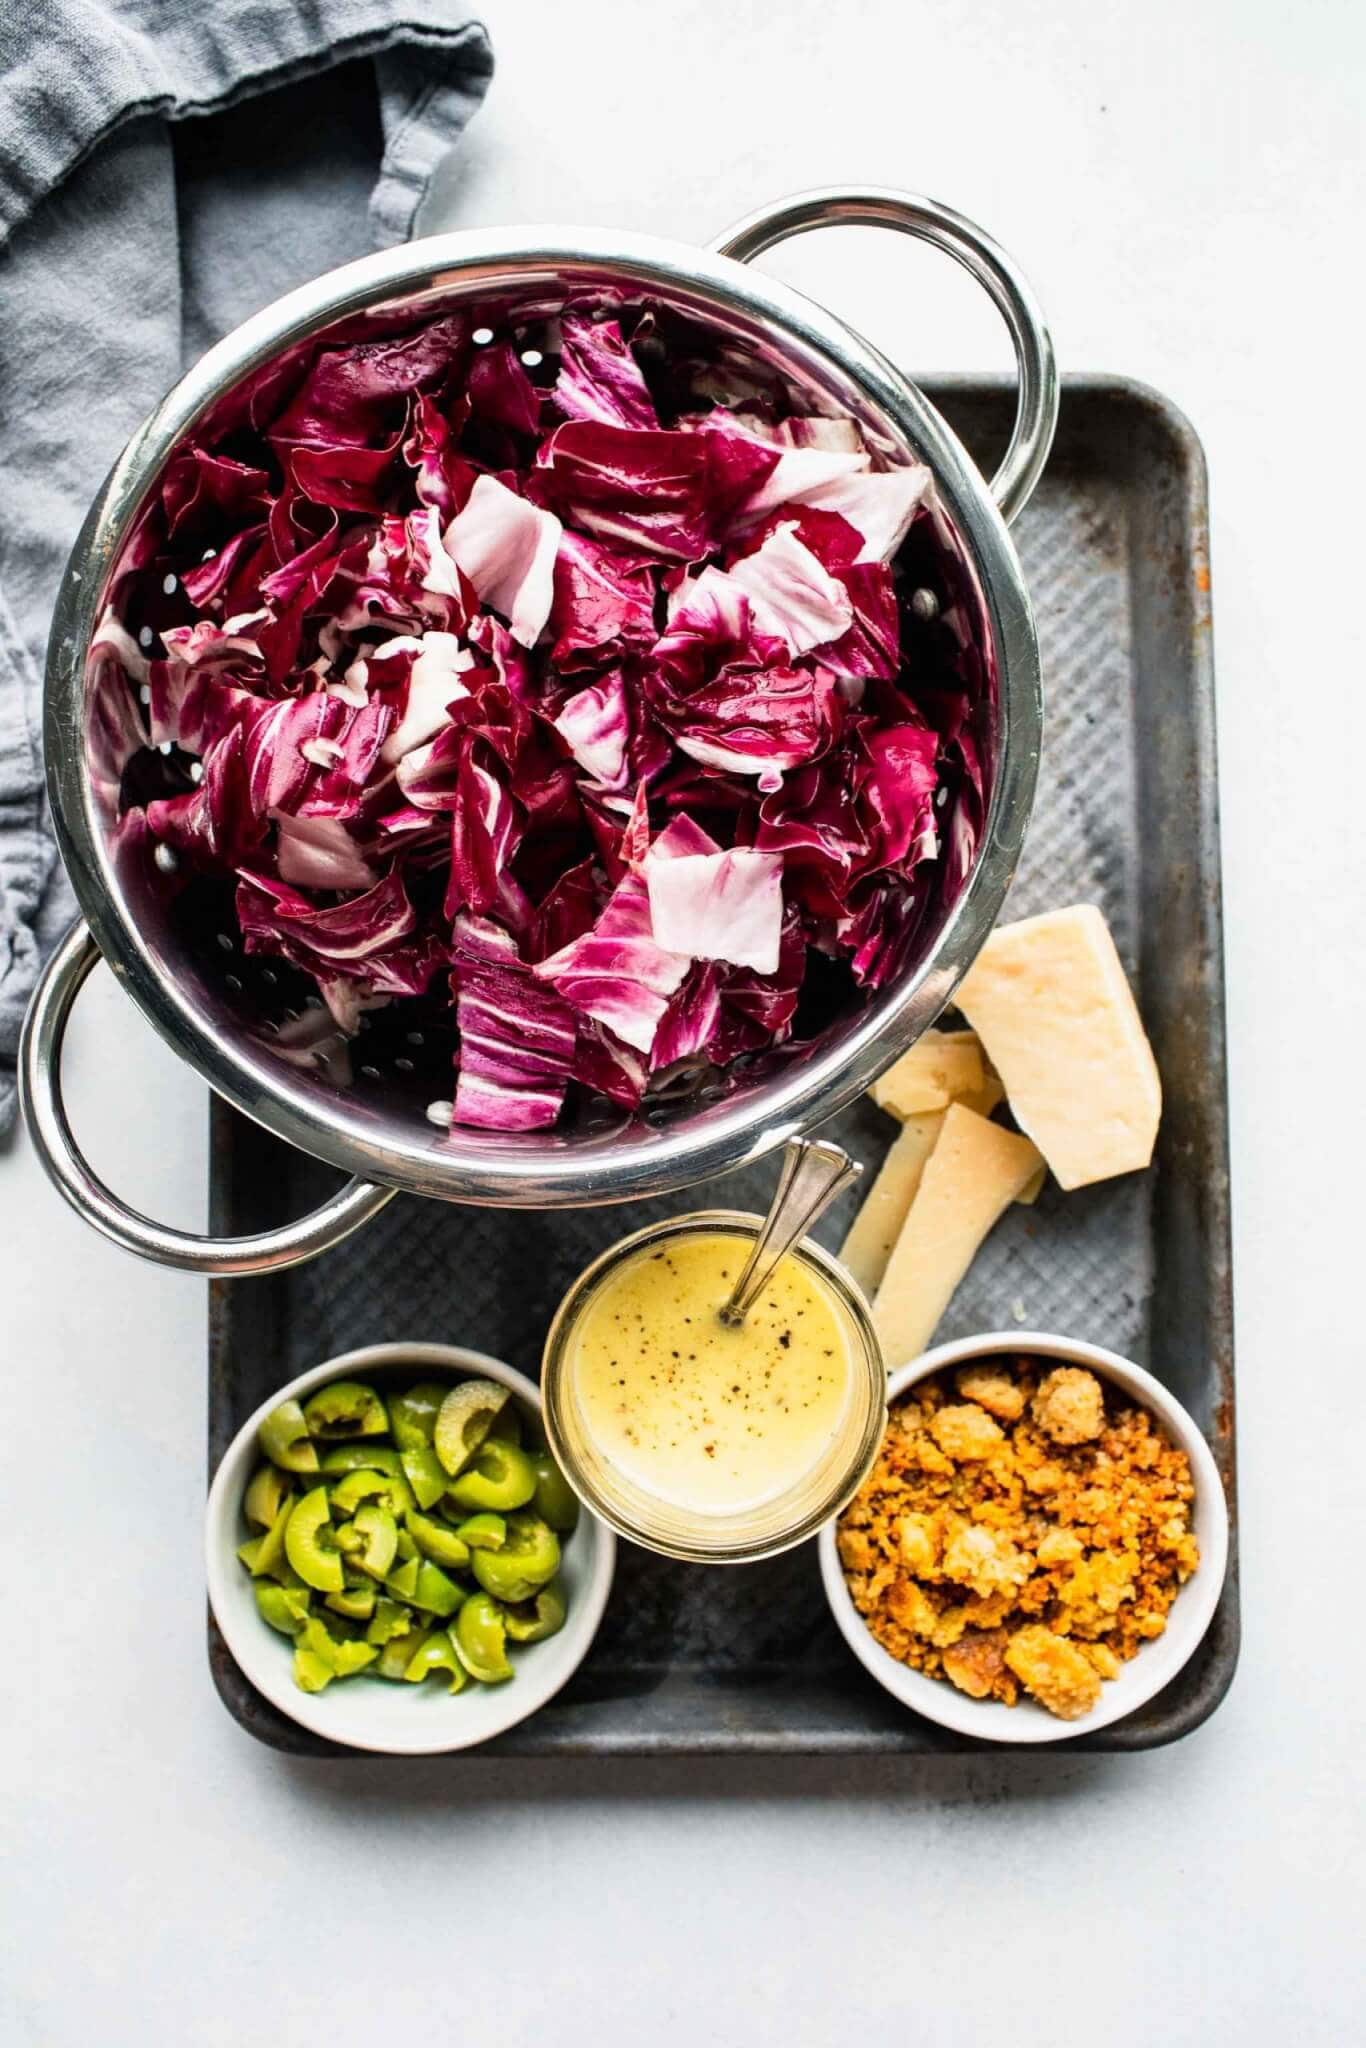 Ingredients for radicchio salad laid out on tray.